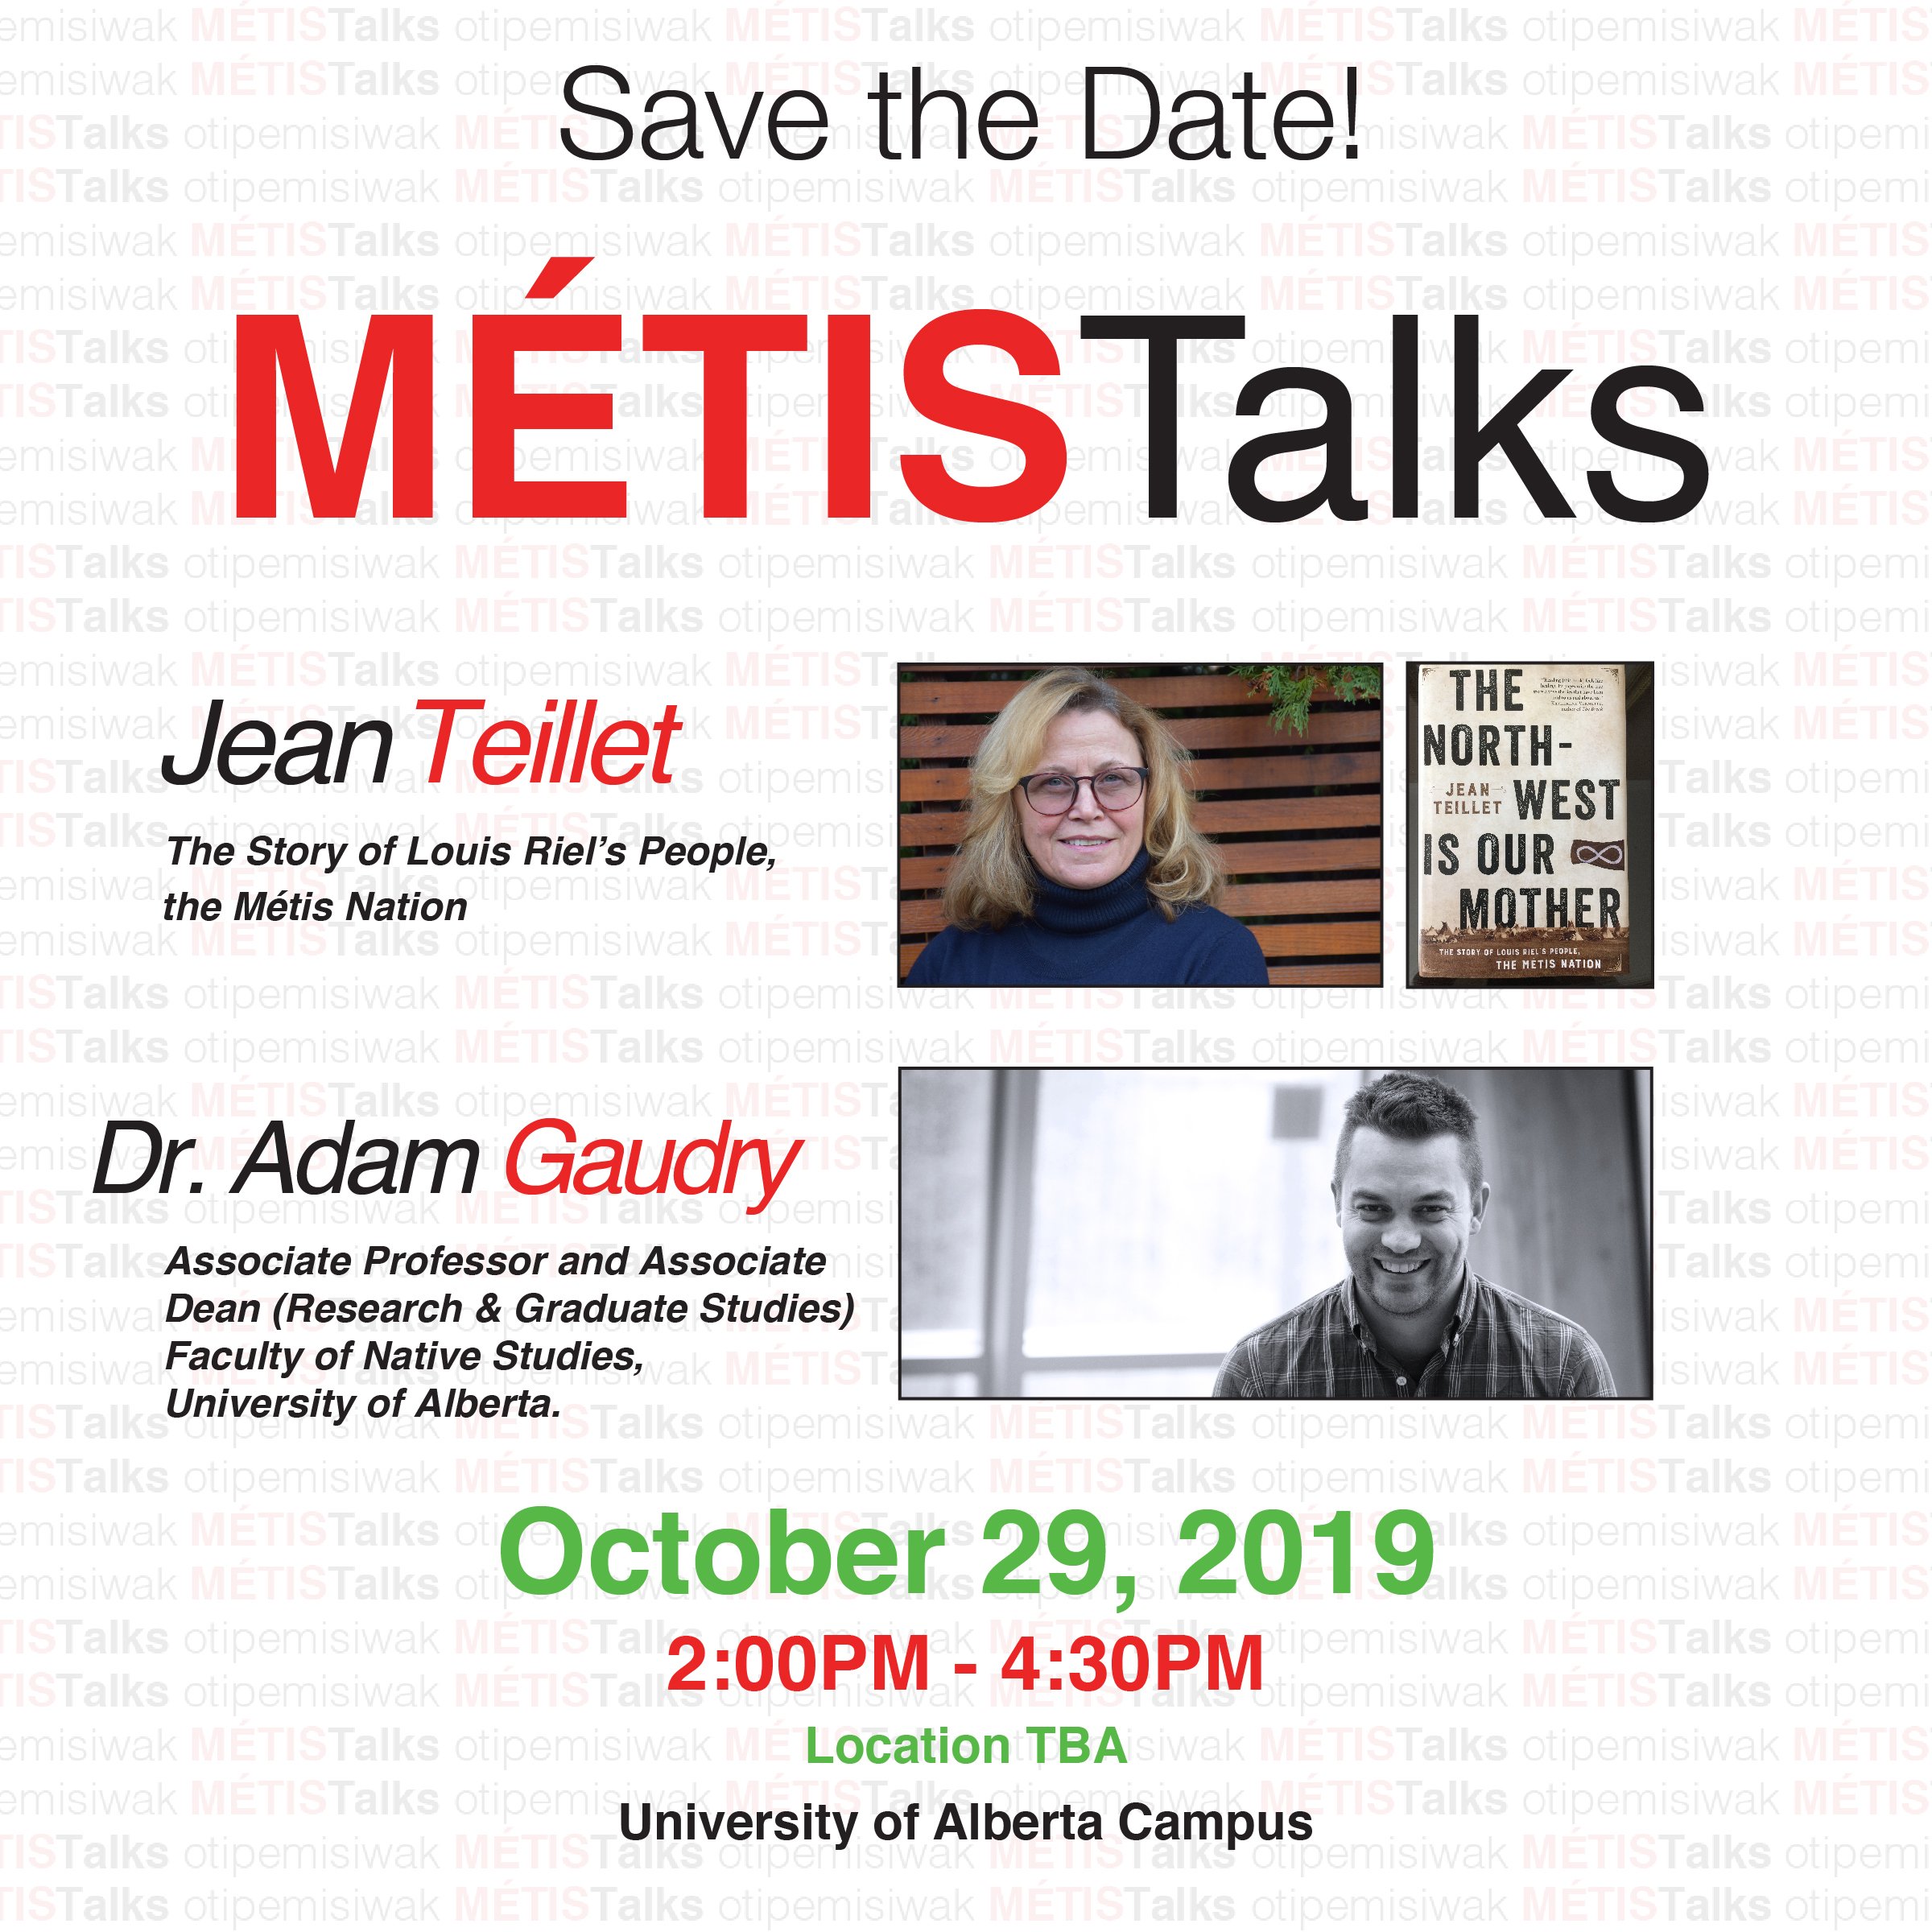 Save the Date Infographic for MÉTIS Talks